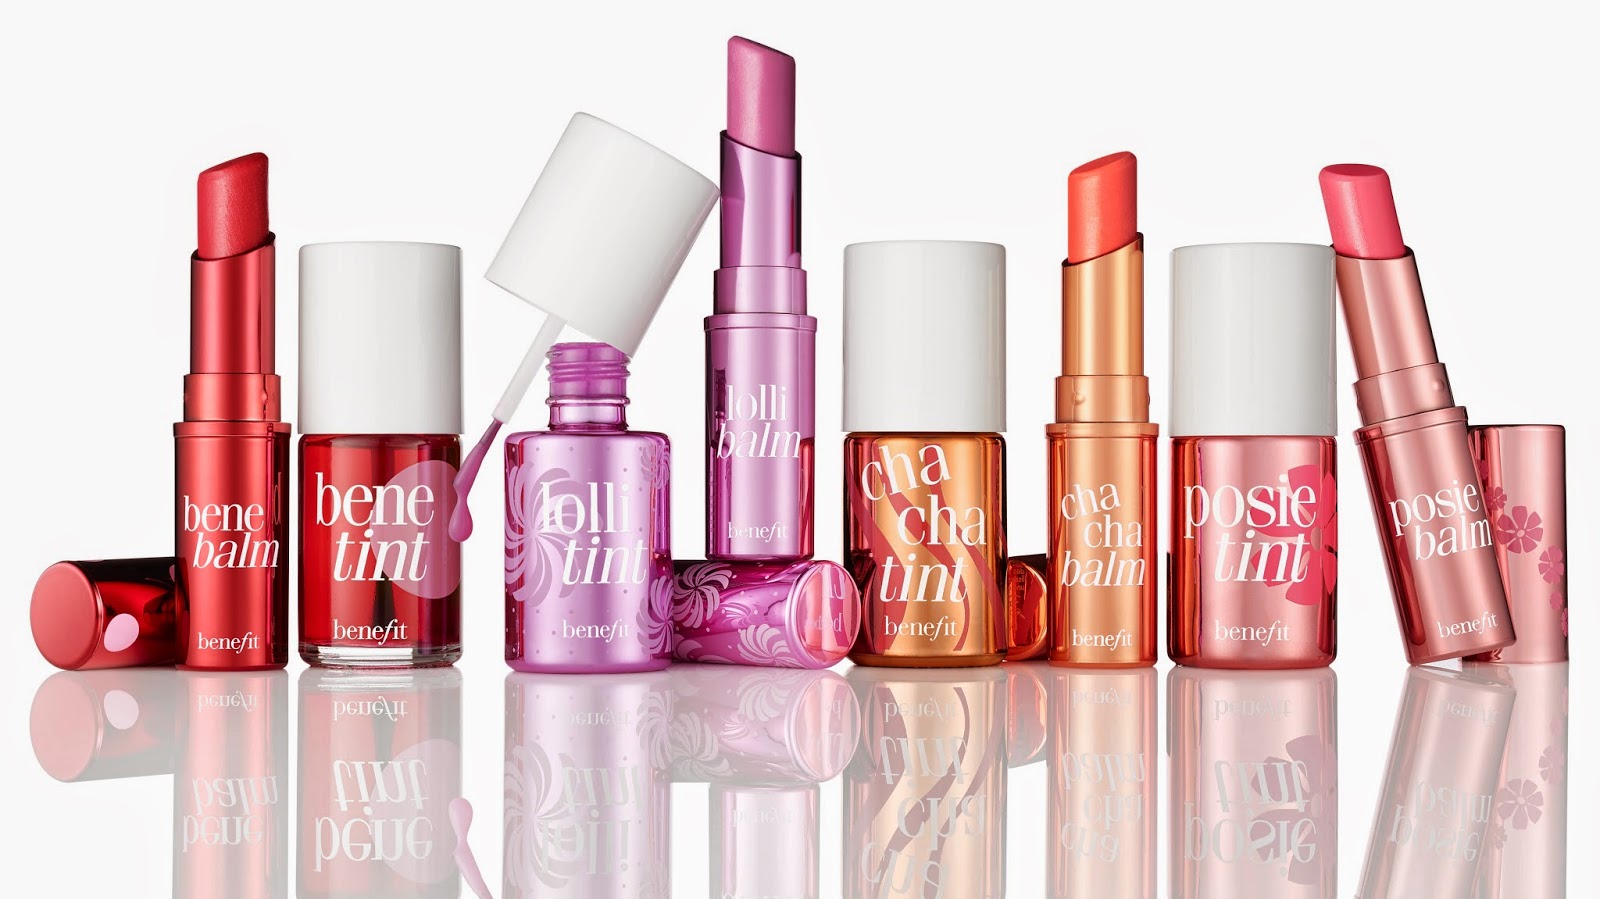 This June Benefit are launching their new hydrating lip balms to sit 